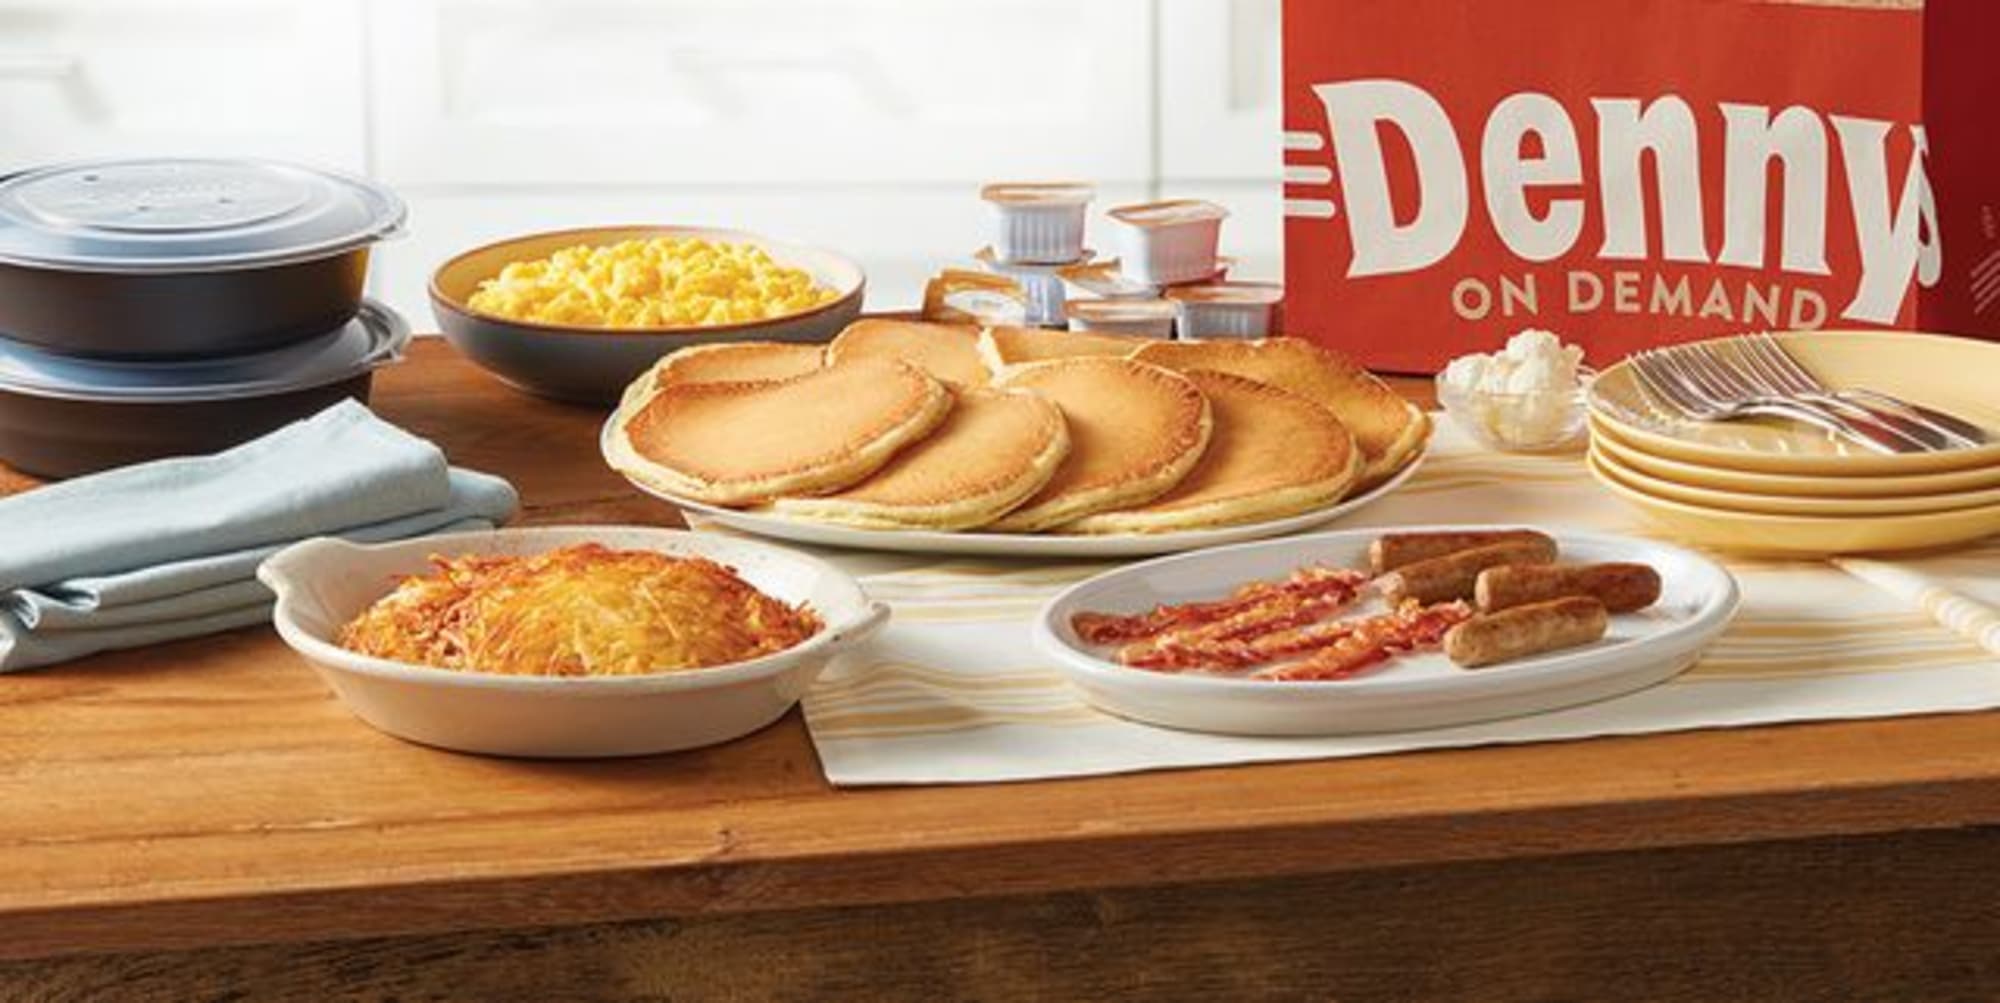 Denny’s is open on Christmas Day and that’s a gift for many diners